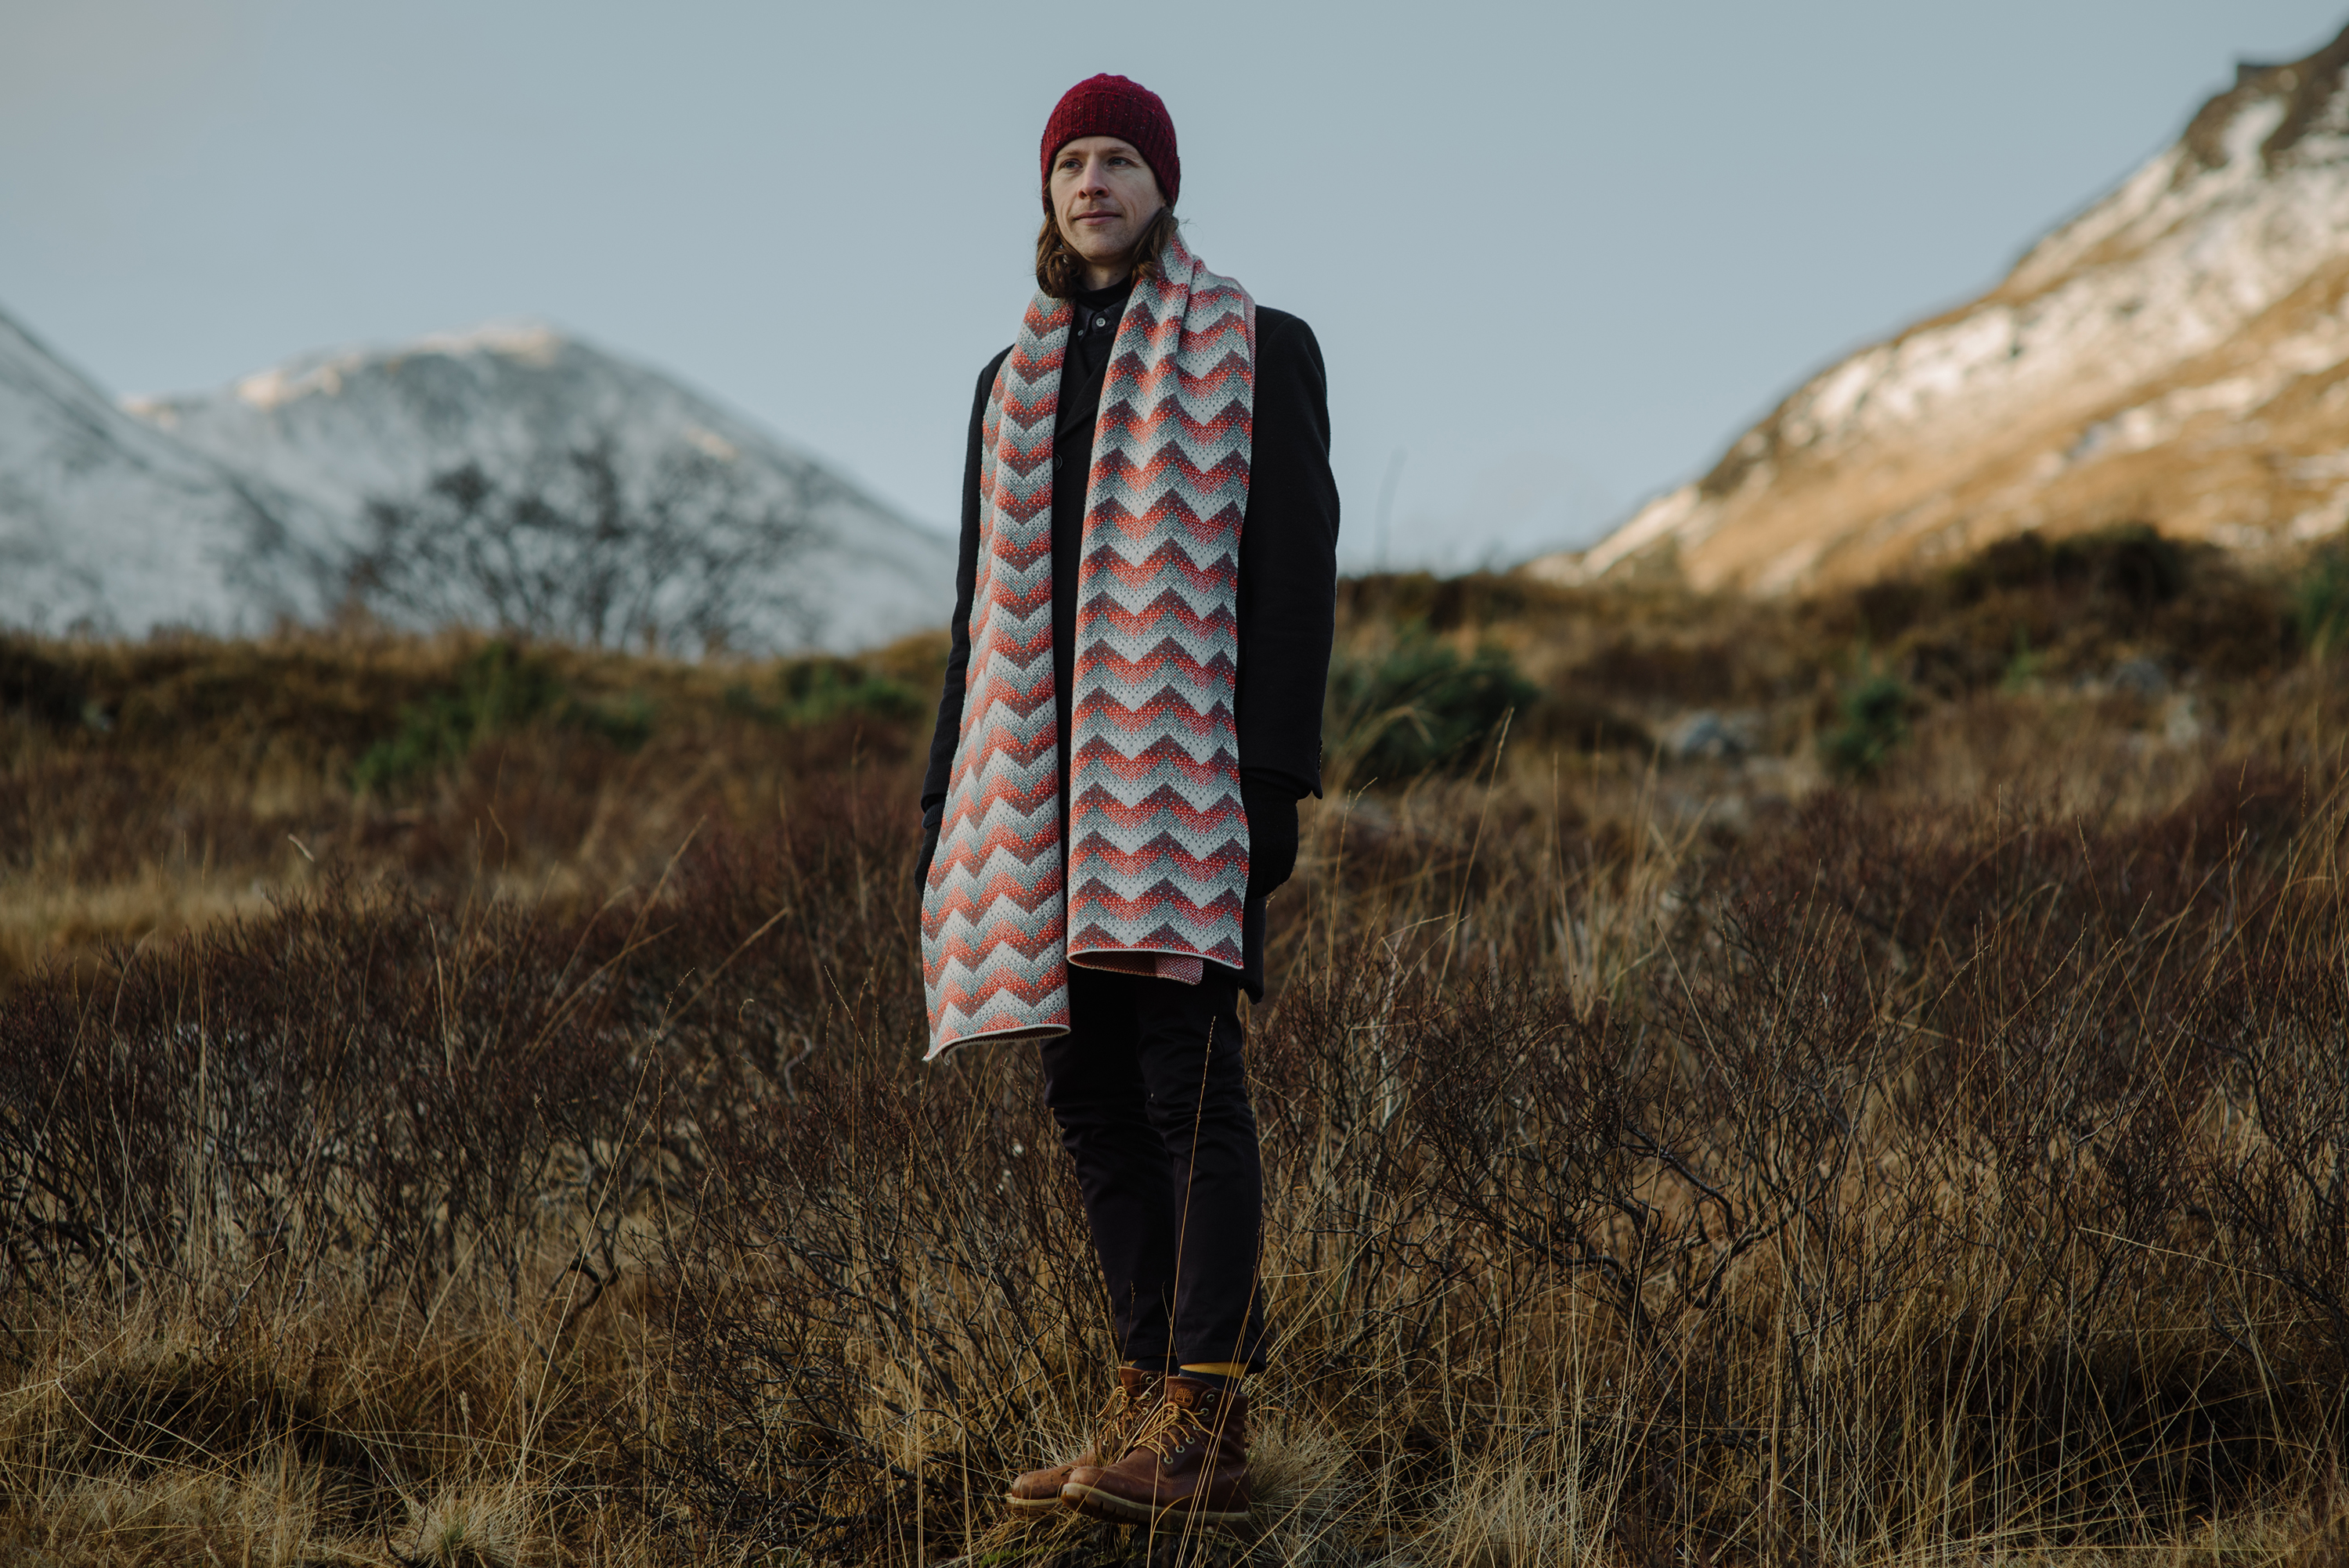 Donegal Wool Beanie by Oubas Knitwear and Elska Shawl by Hilary Grant / Photograph by Steven Gallagher